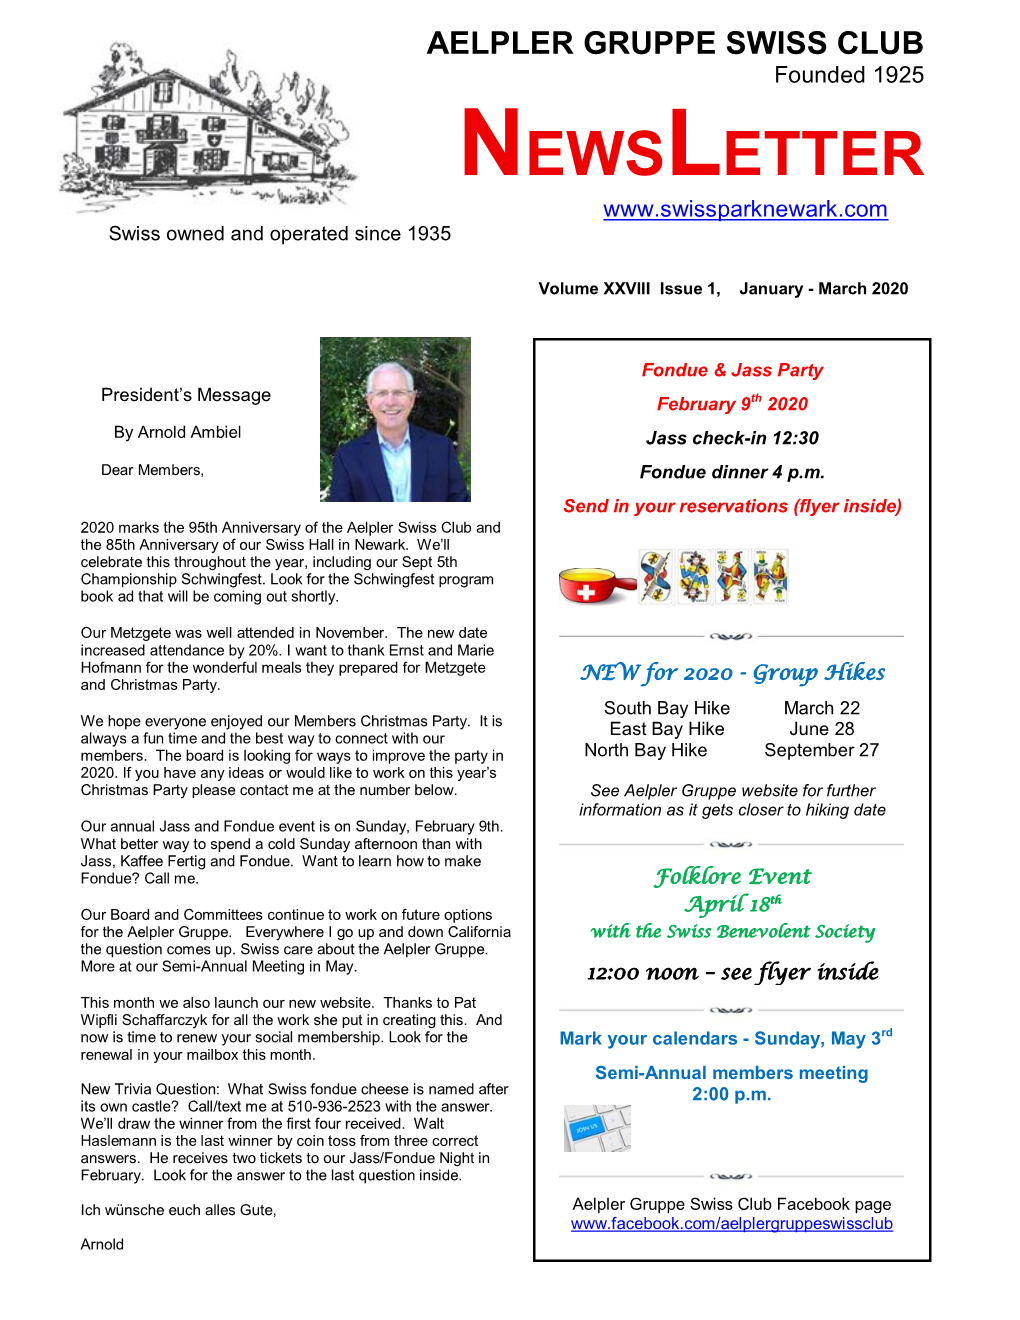 AELPLER GRUPPE SWISS CLUB Founded 1925 NEWSLETTER Swiss Owned and Operated Since 1935